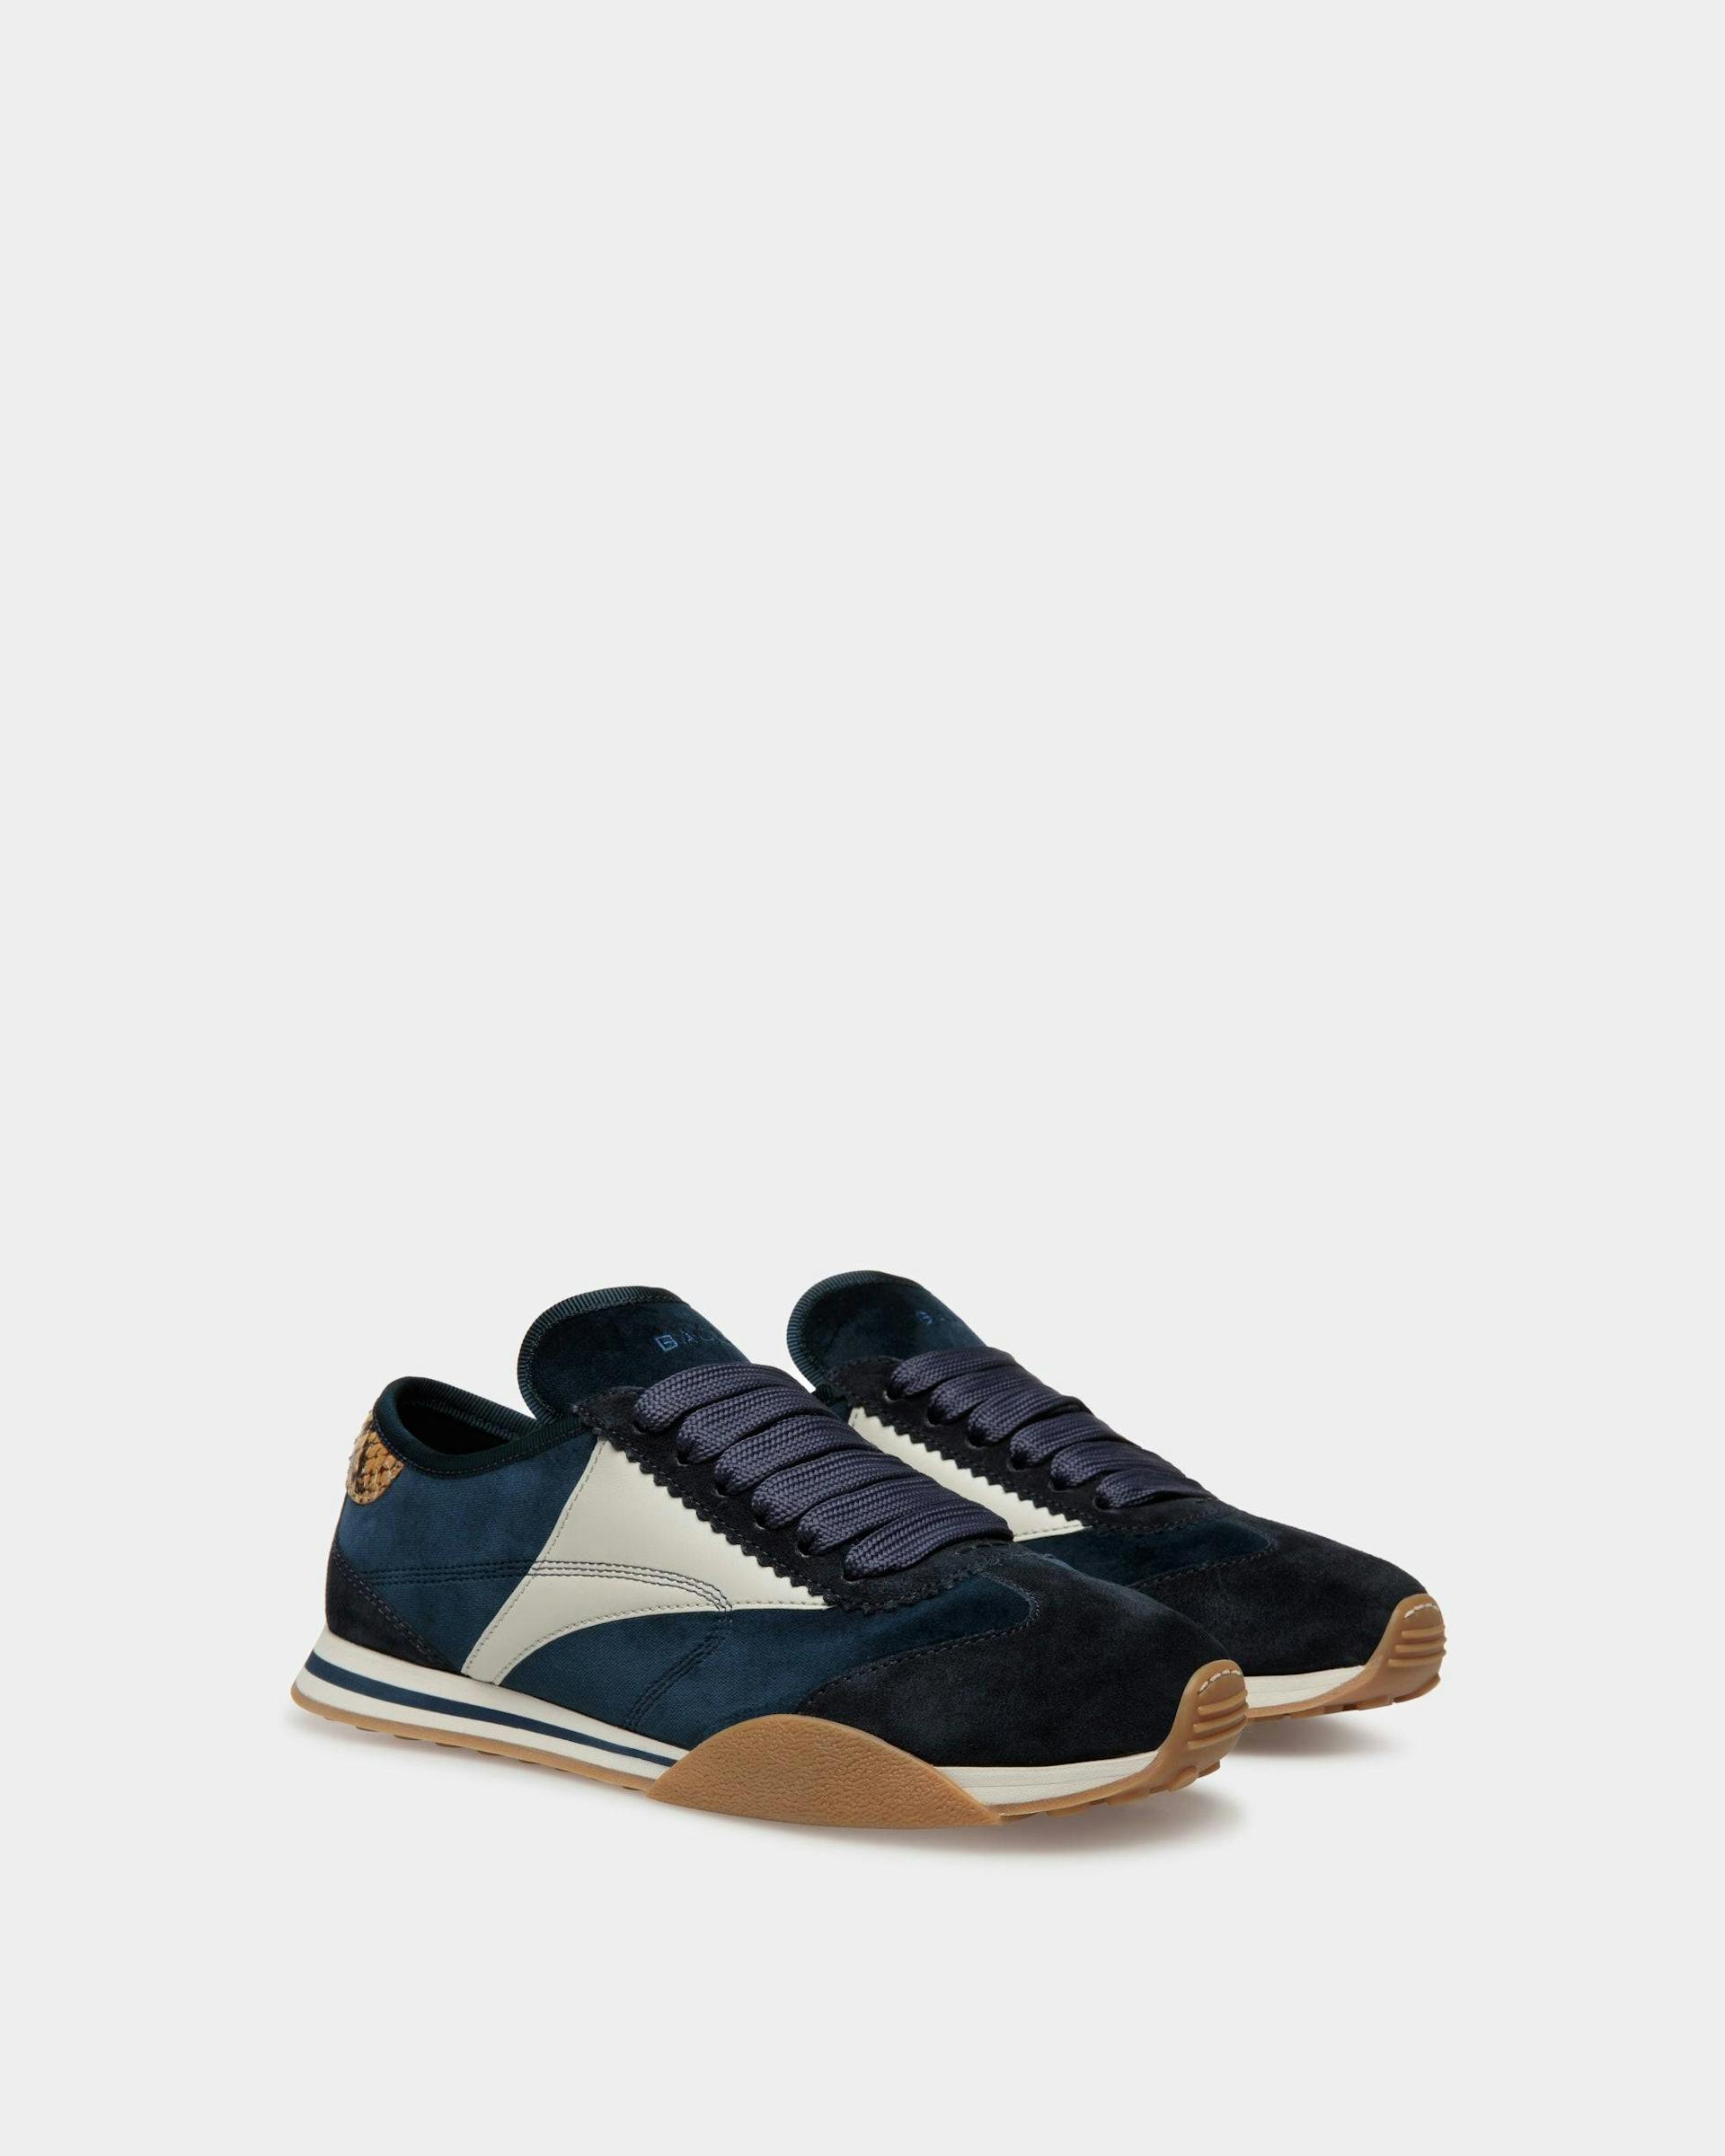 Sussex Sneakers In Midnight And Dusty White Leather And Cotton - Women's - Bally - 02